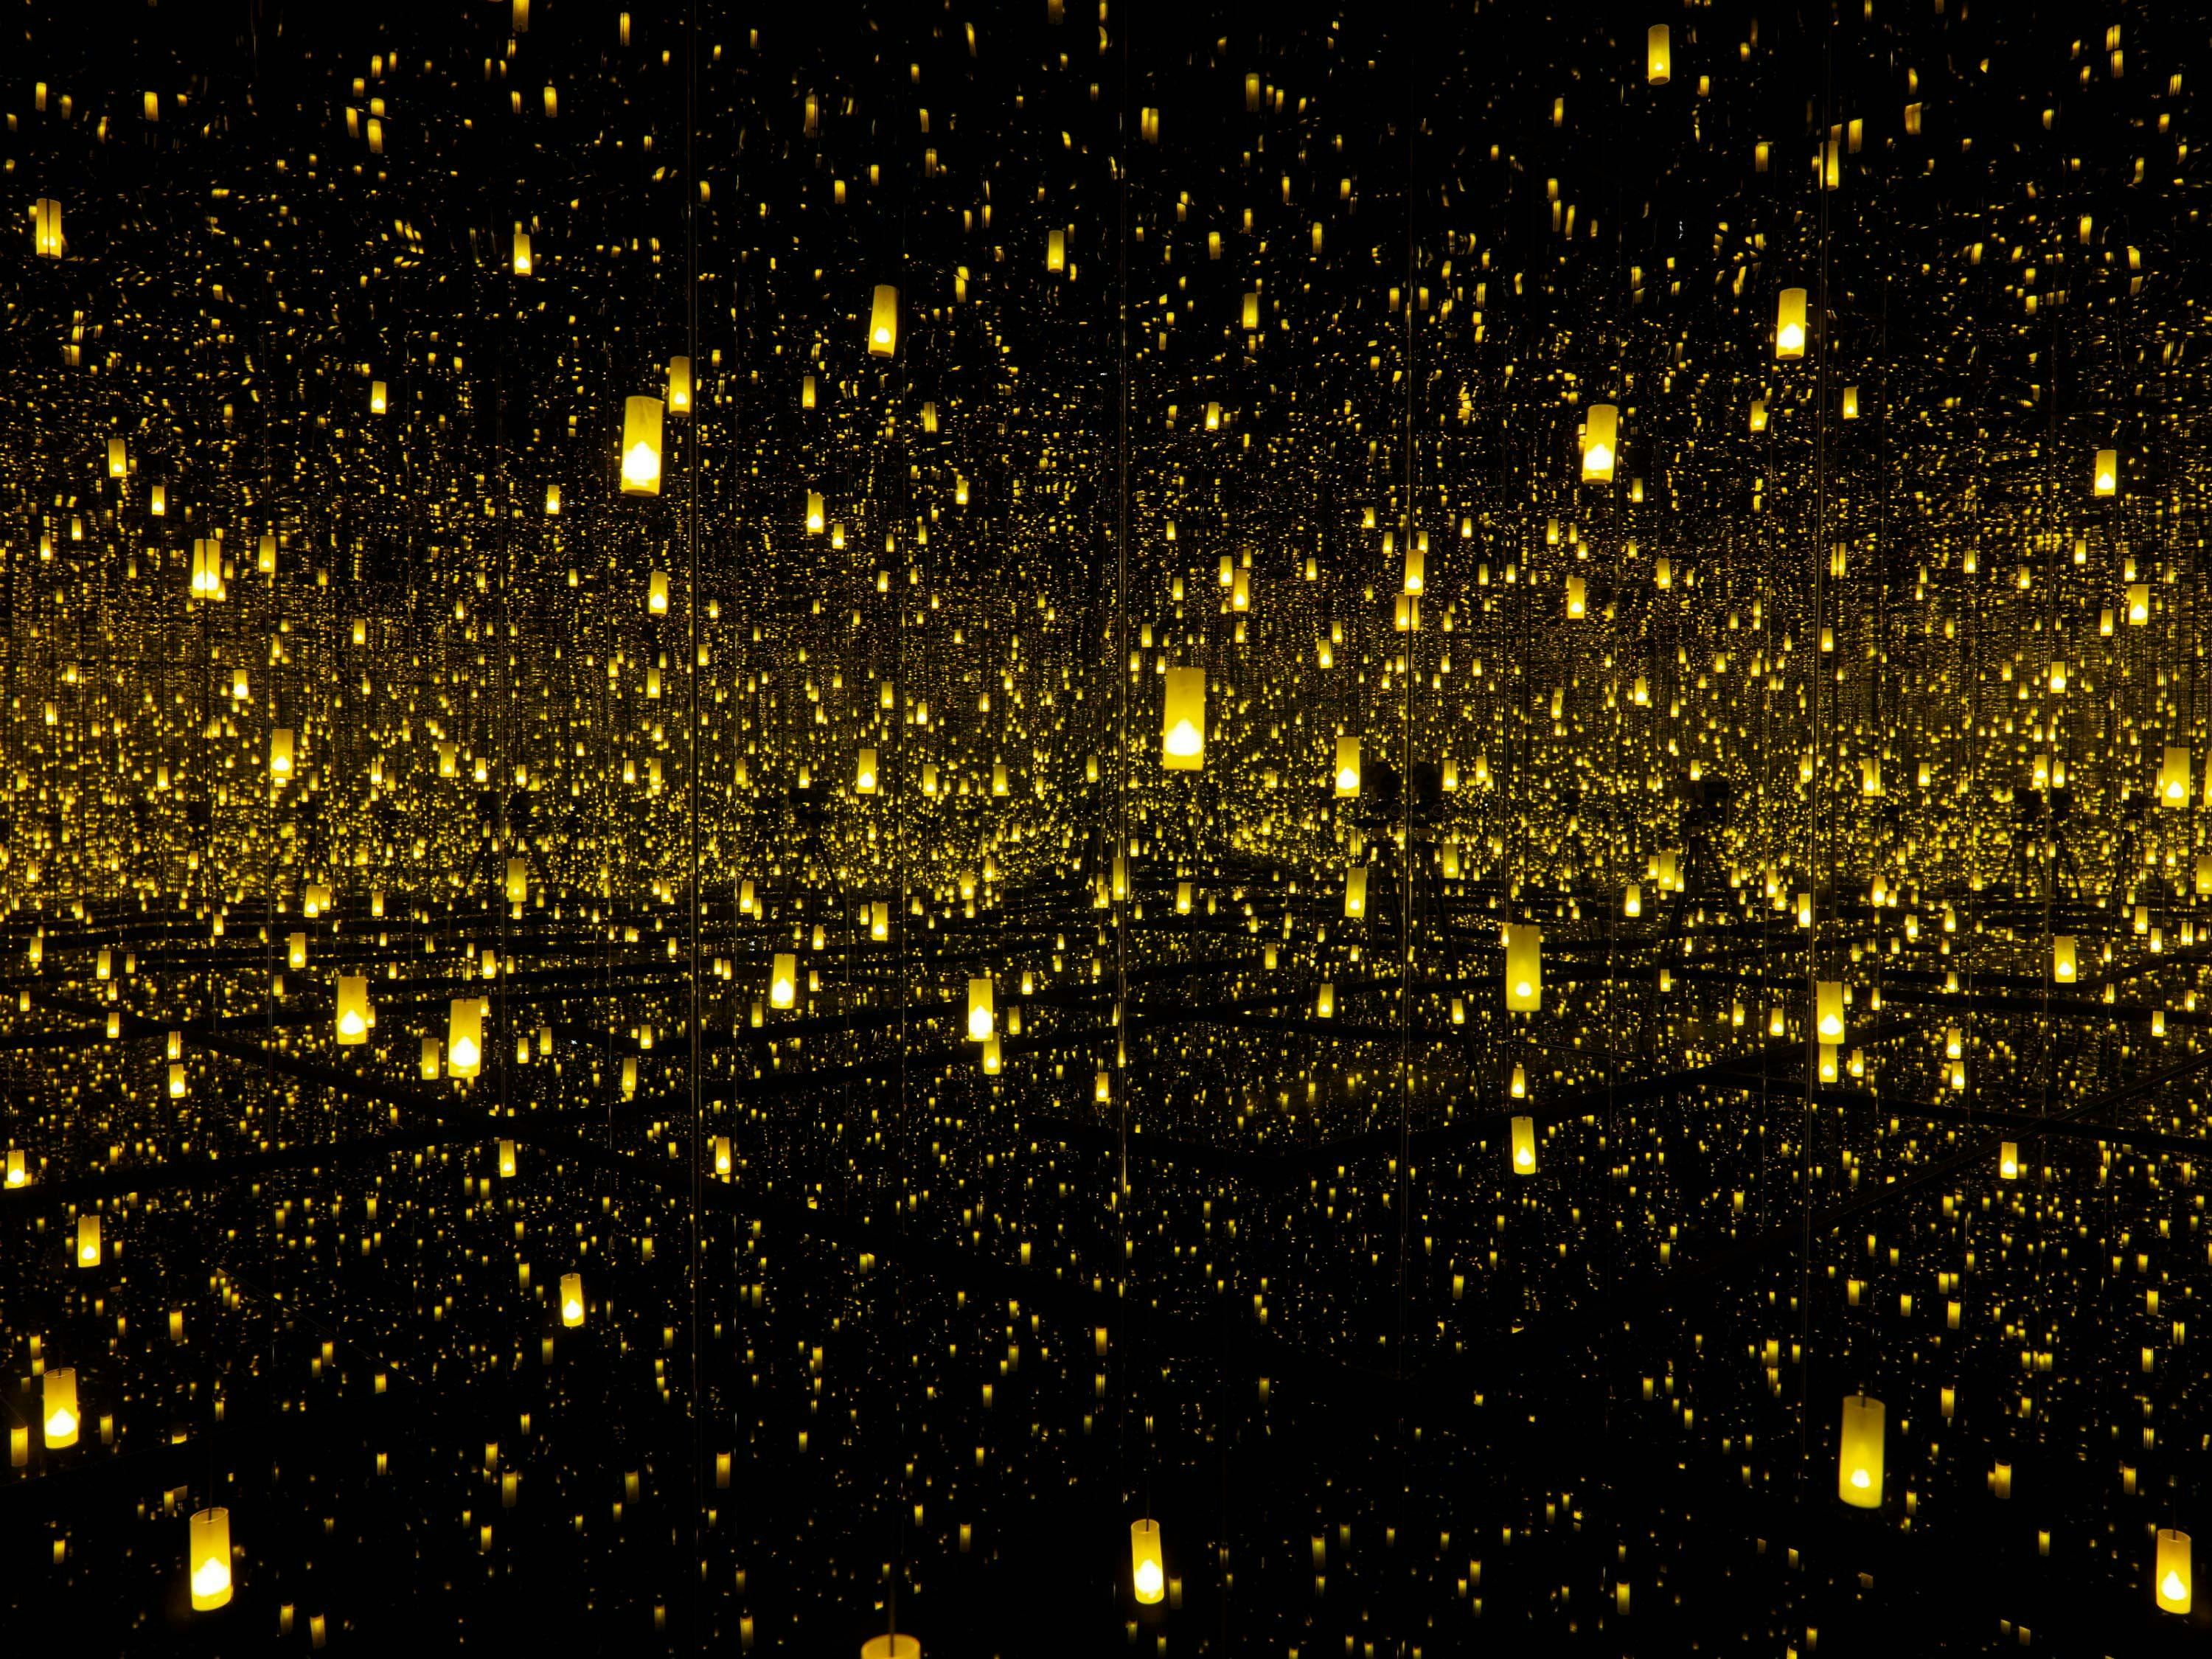 An installation by Yayoi Kusama, titled Aftermath of Obliteration of Eternity, dated 2009.